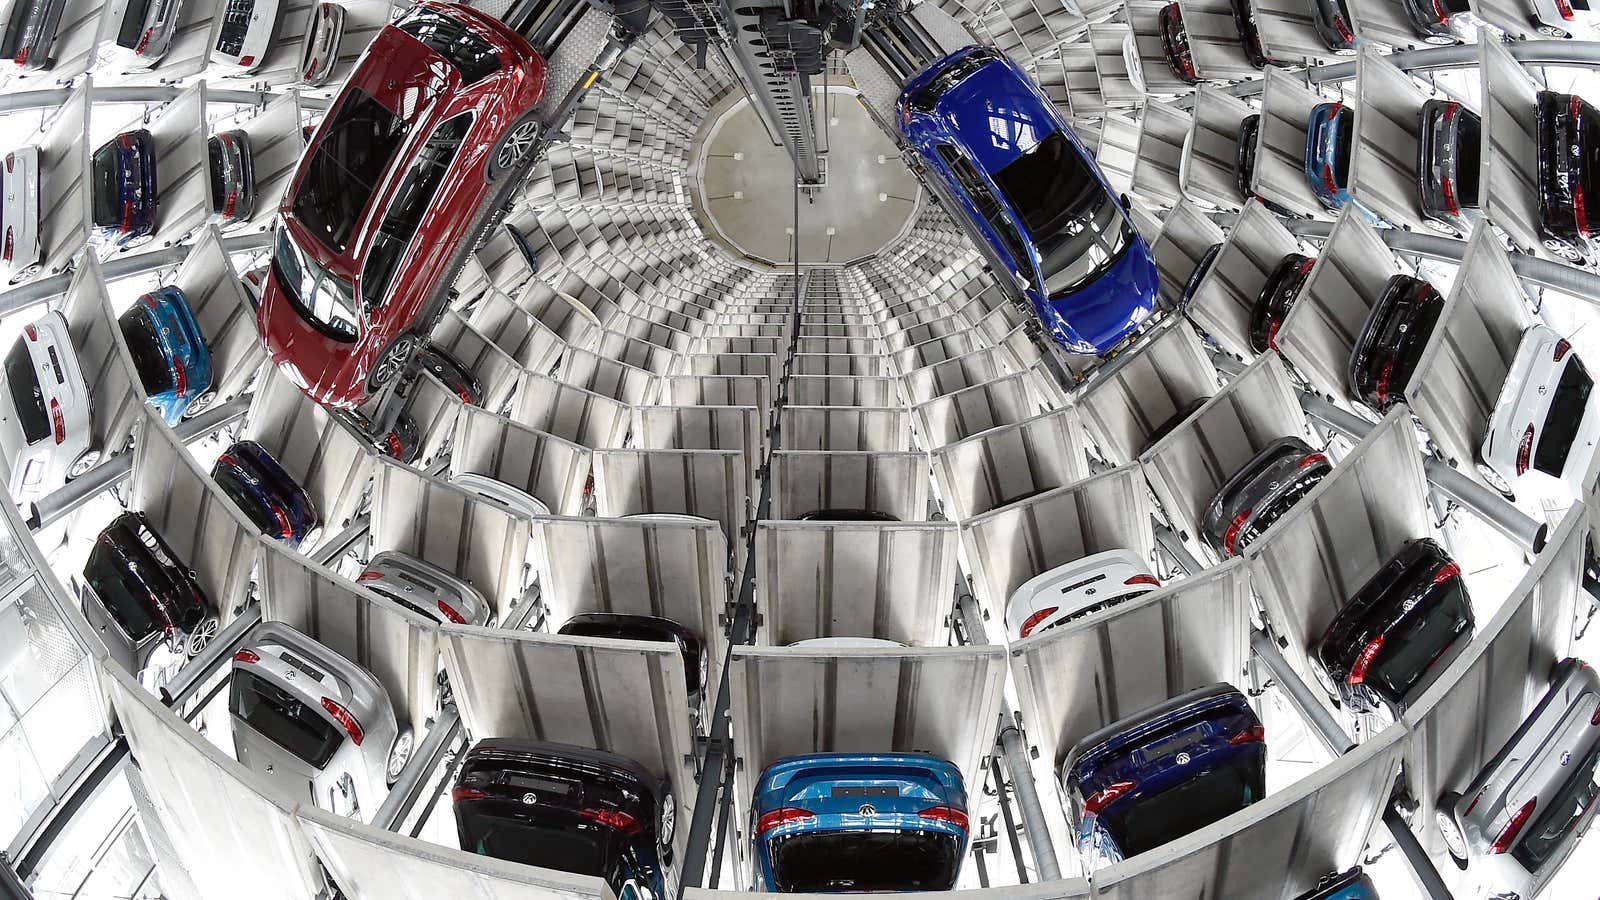 VW Golfs are loaded in a delivery tower at the plant of German carmaker Volkswagen in Wolfsburg, Germany, March 14, 2017. REUTERS/Fabian Bimmer – LR1ED3E0W7UCC